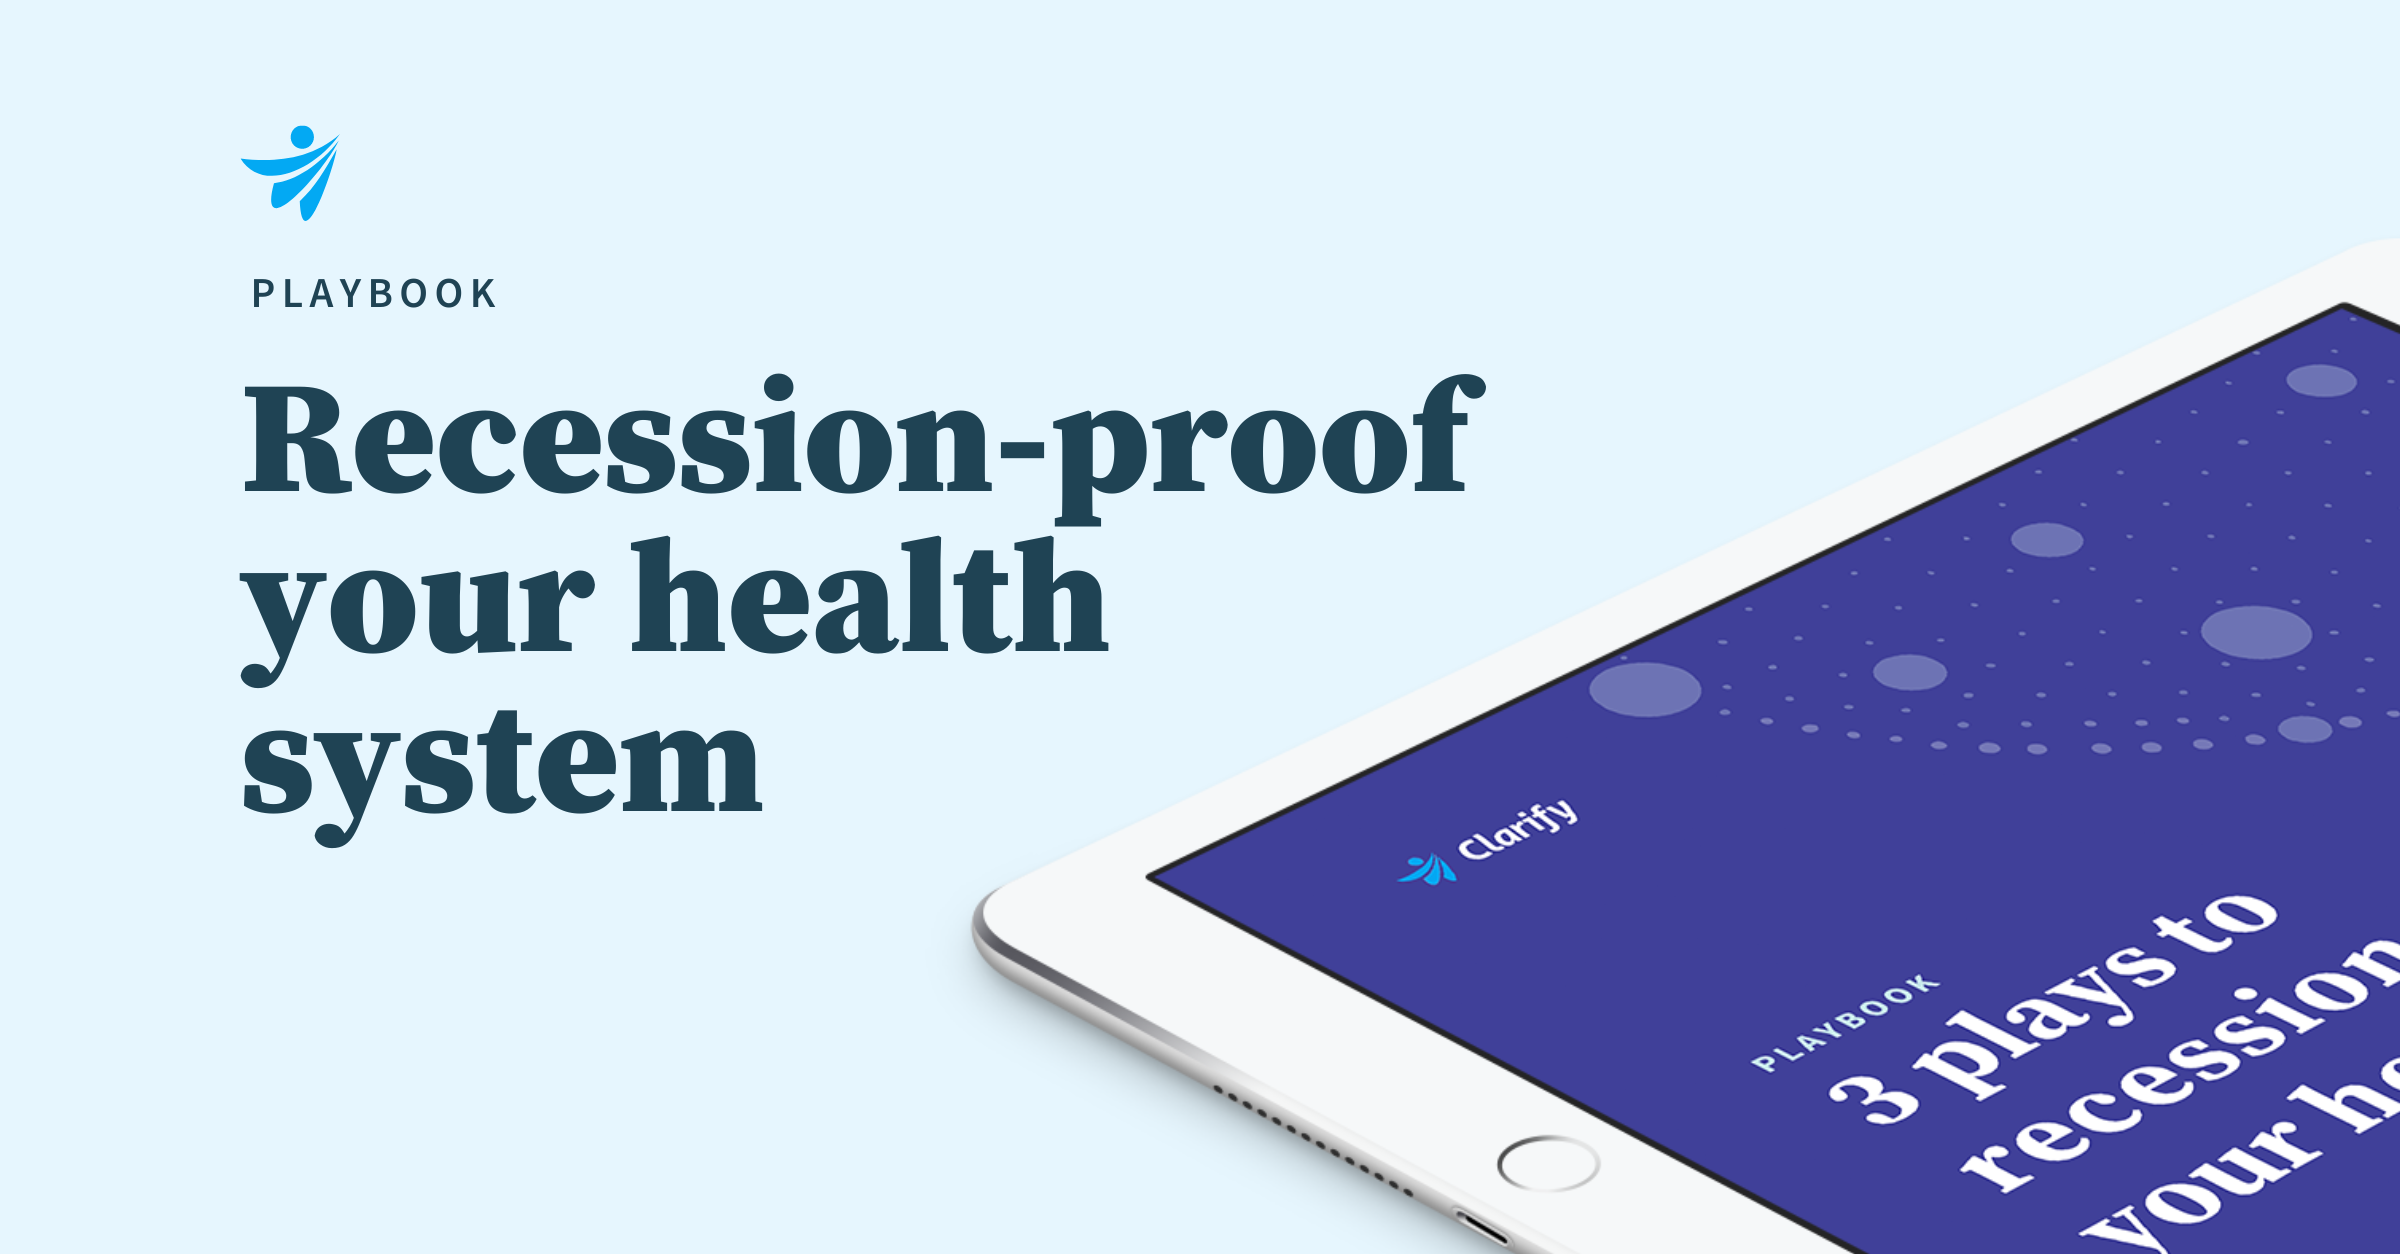 Clarify Health Playbook 3 Plays to Recession Proof Your Health System